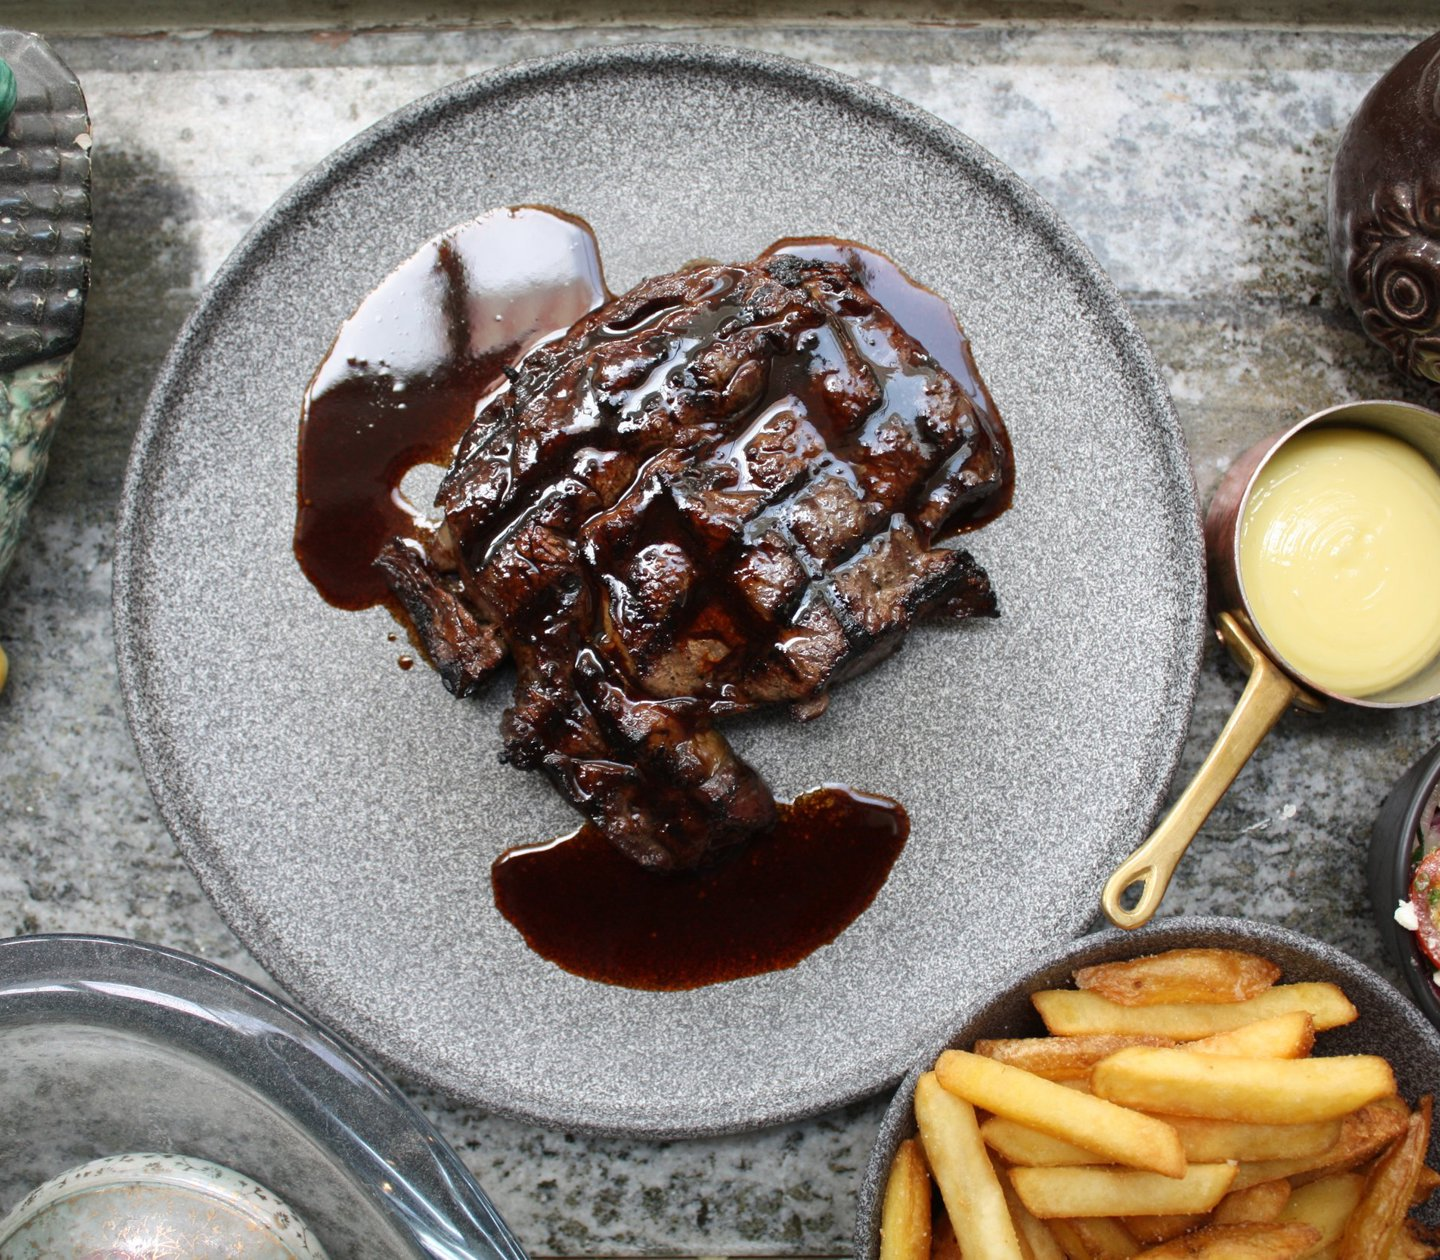 A steak served with fries and sauce